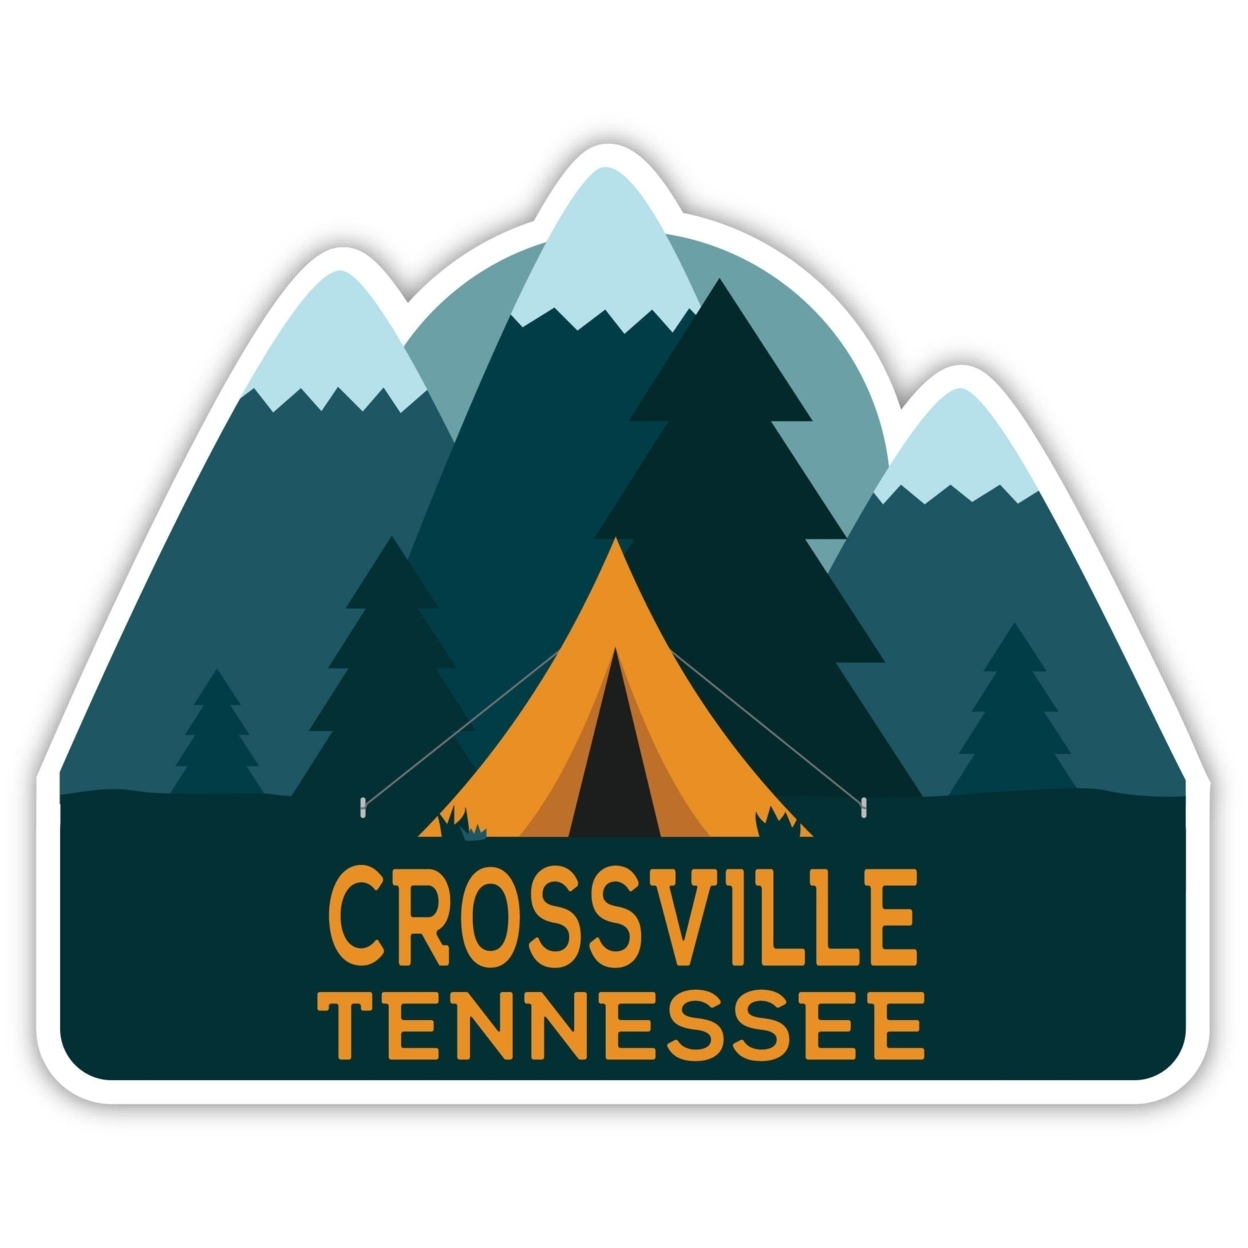 Crossville Tennessee Souvenir Decorative Stickers (Choose Theme And Size) - Single Unit, 8-Inch, Tent